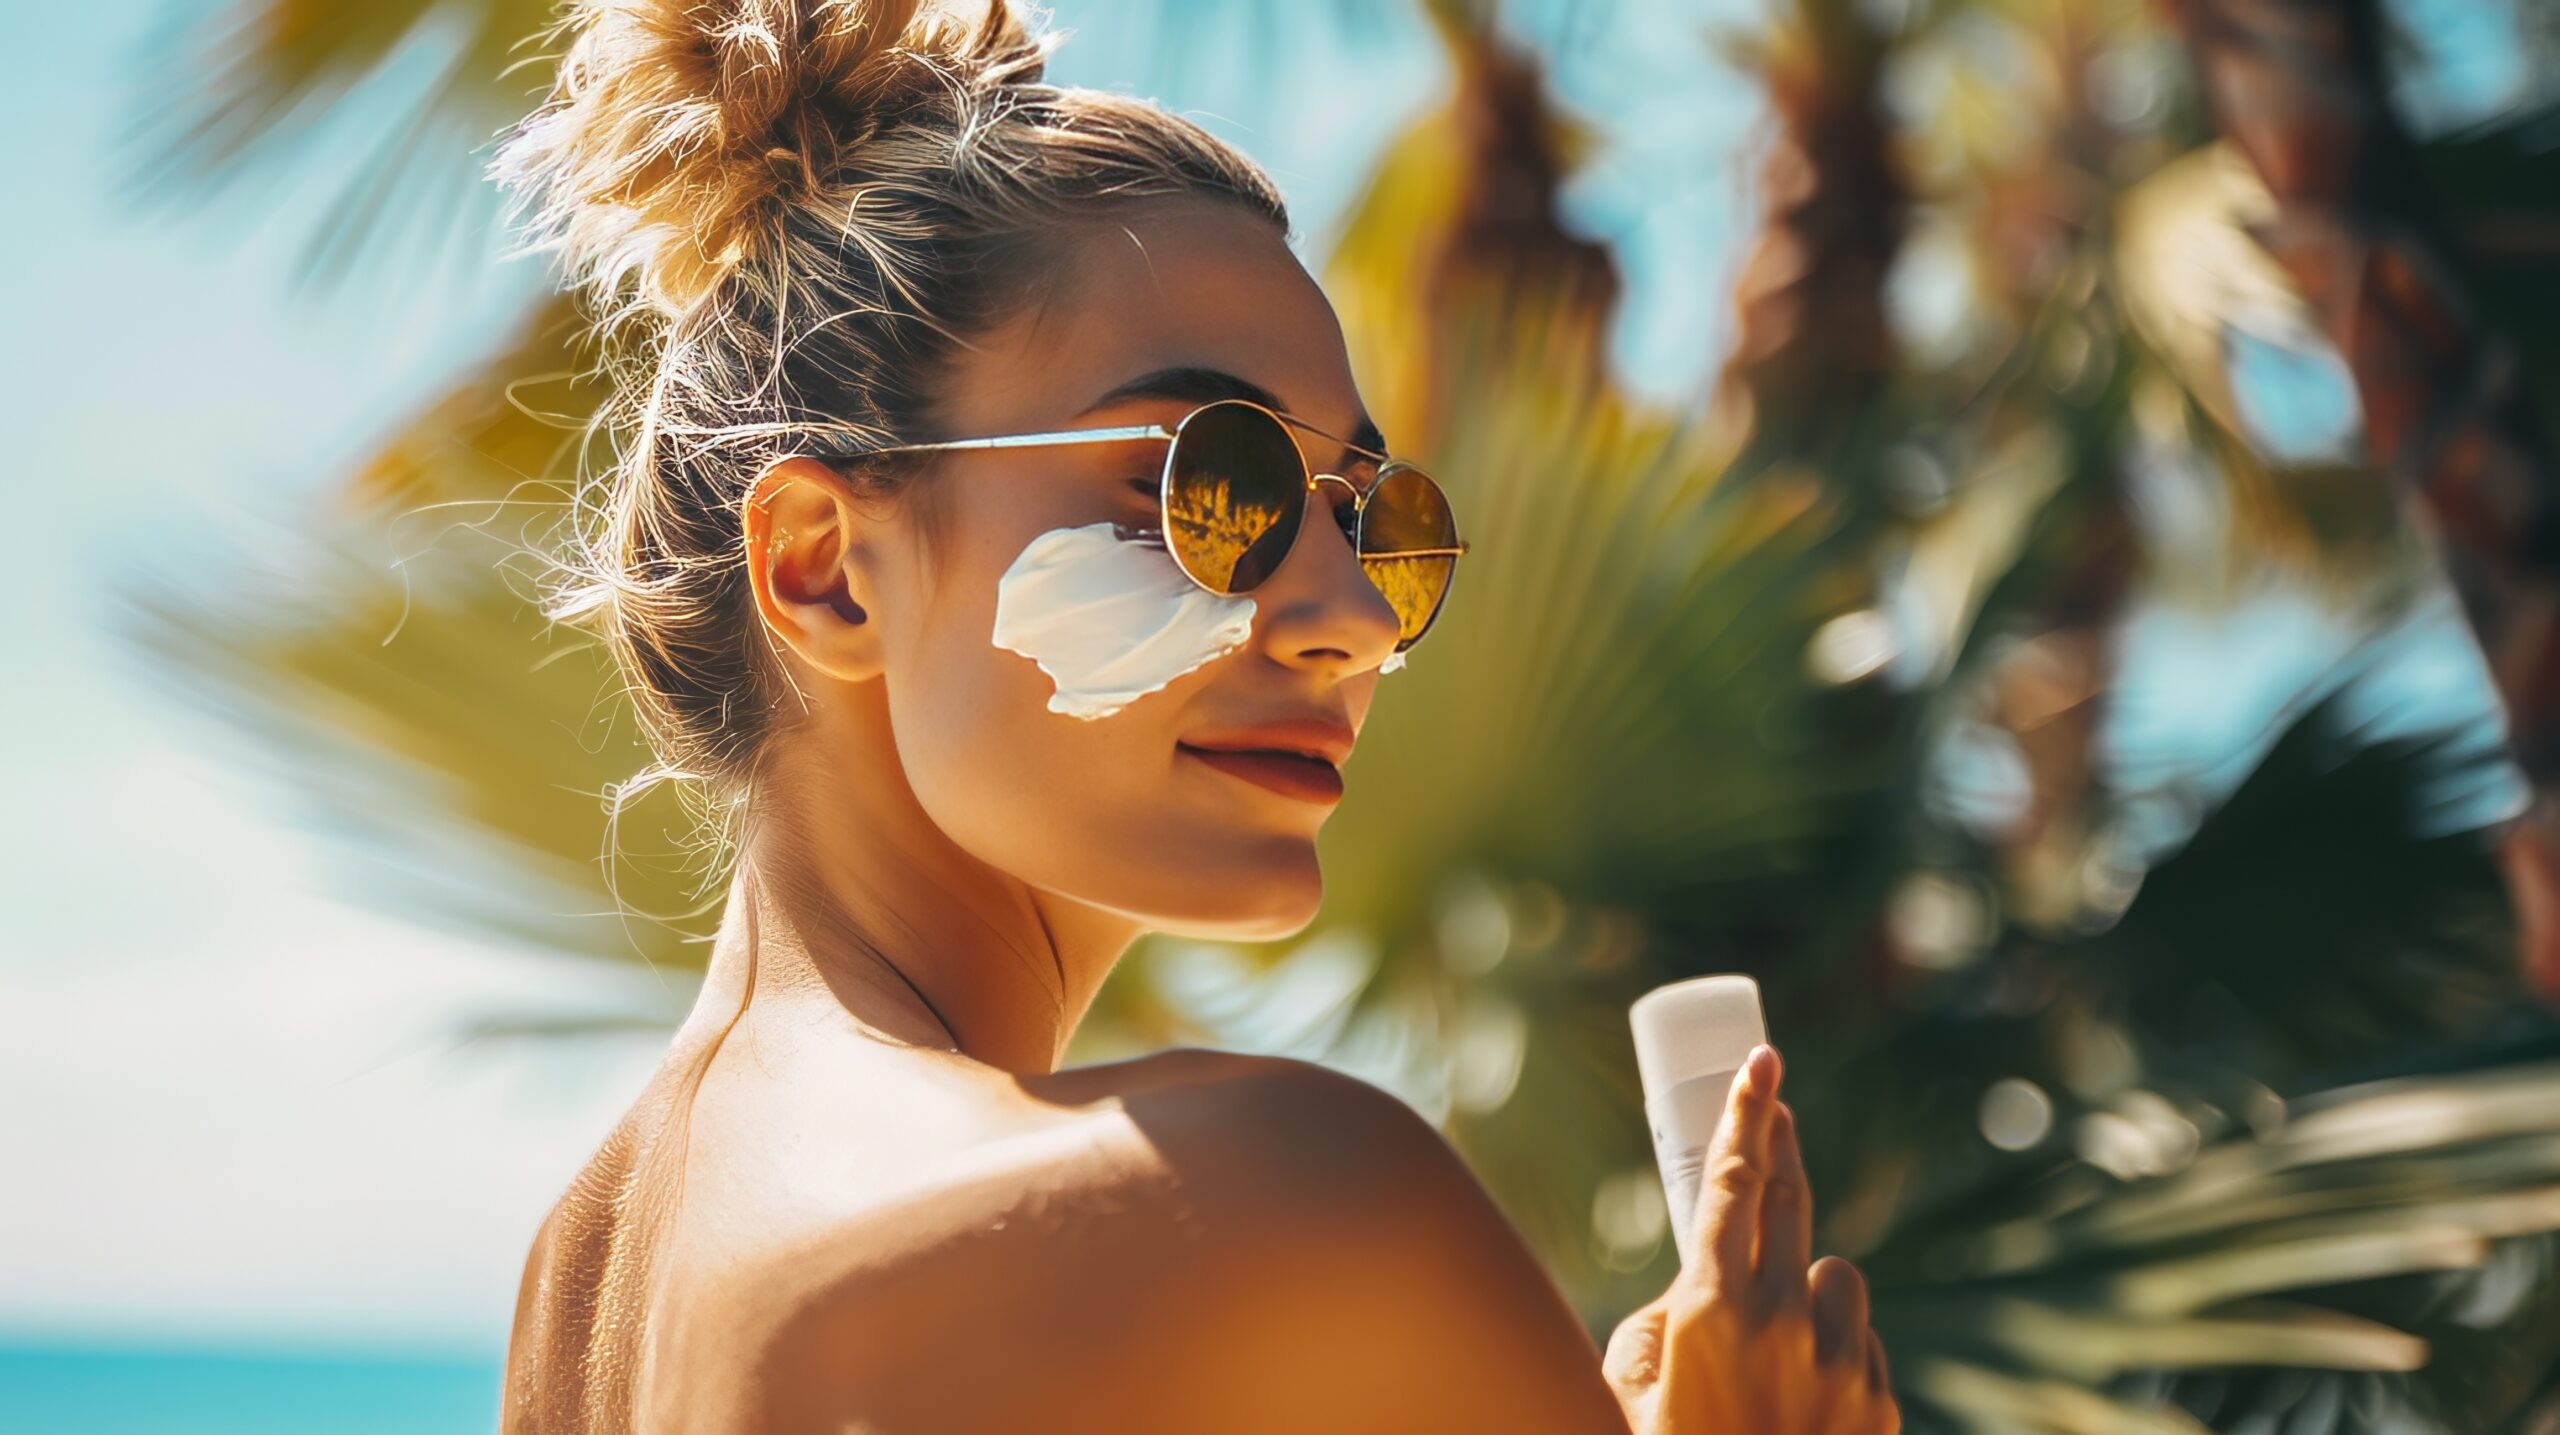 What You Need to Know About UV Radiation